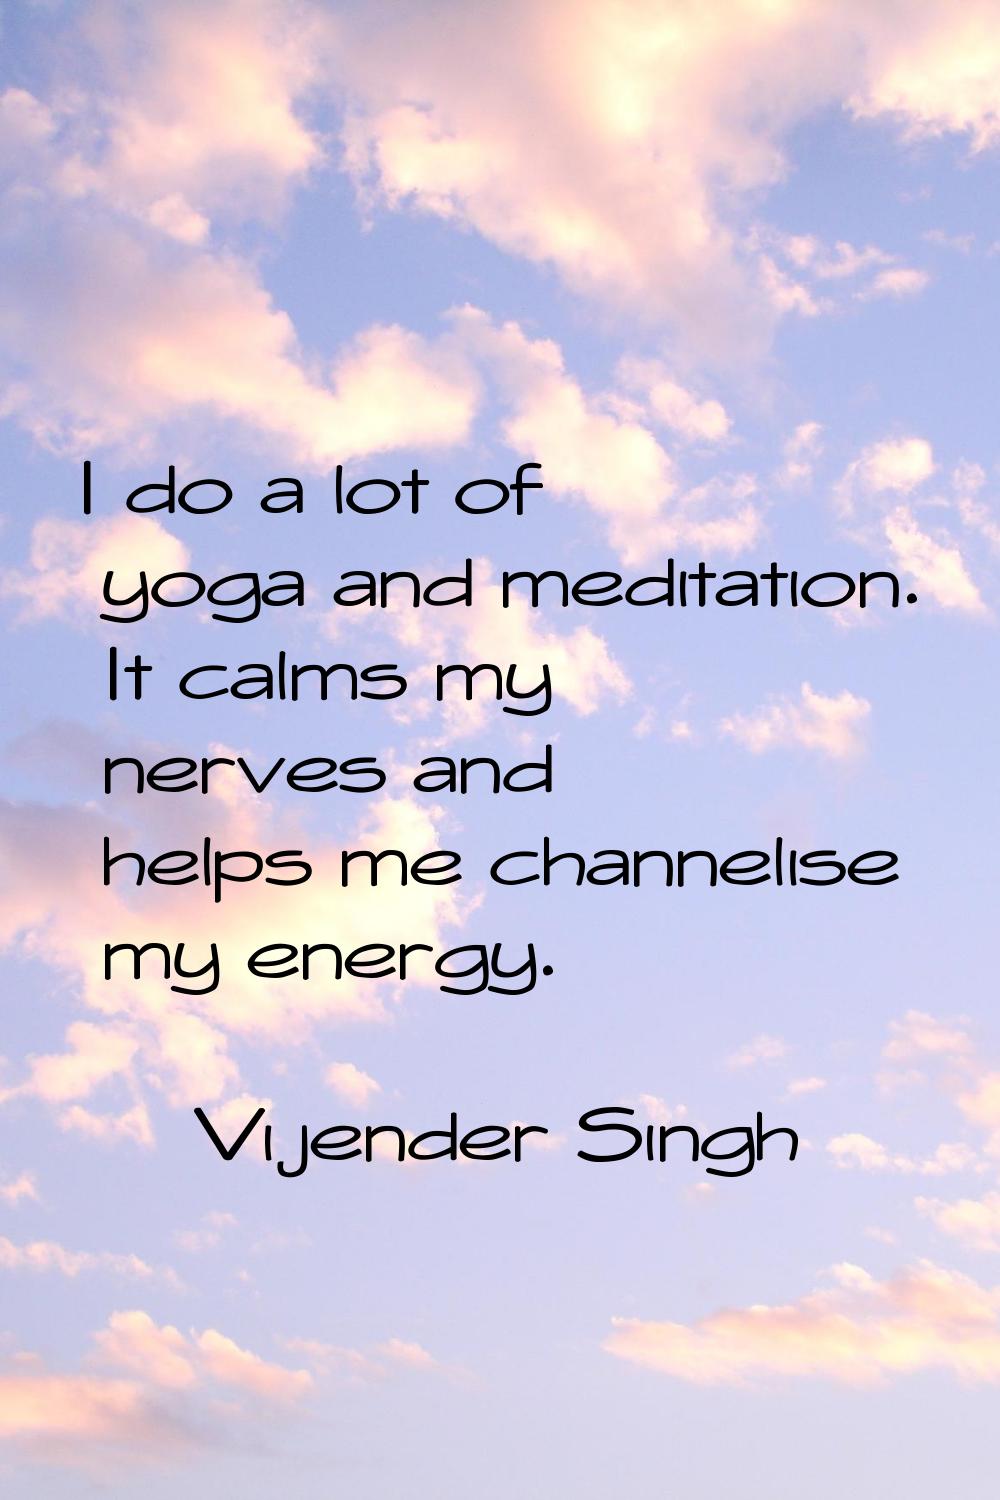 I do a lot of yoga and meditation. It calms my nerves and helps me channelise my energy.